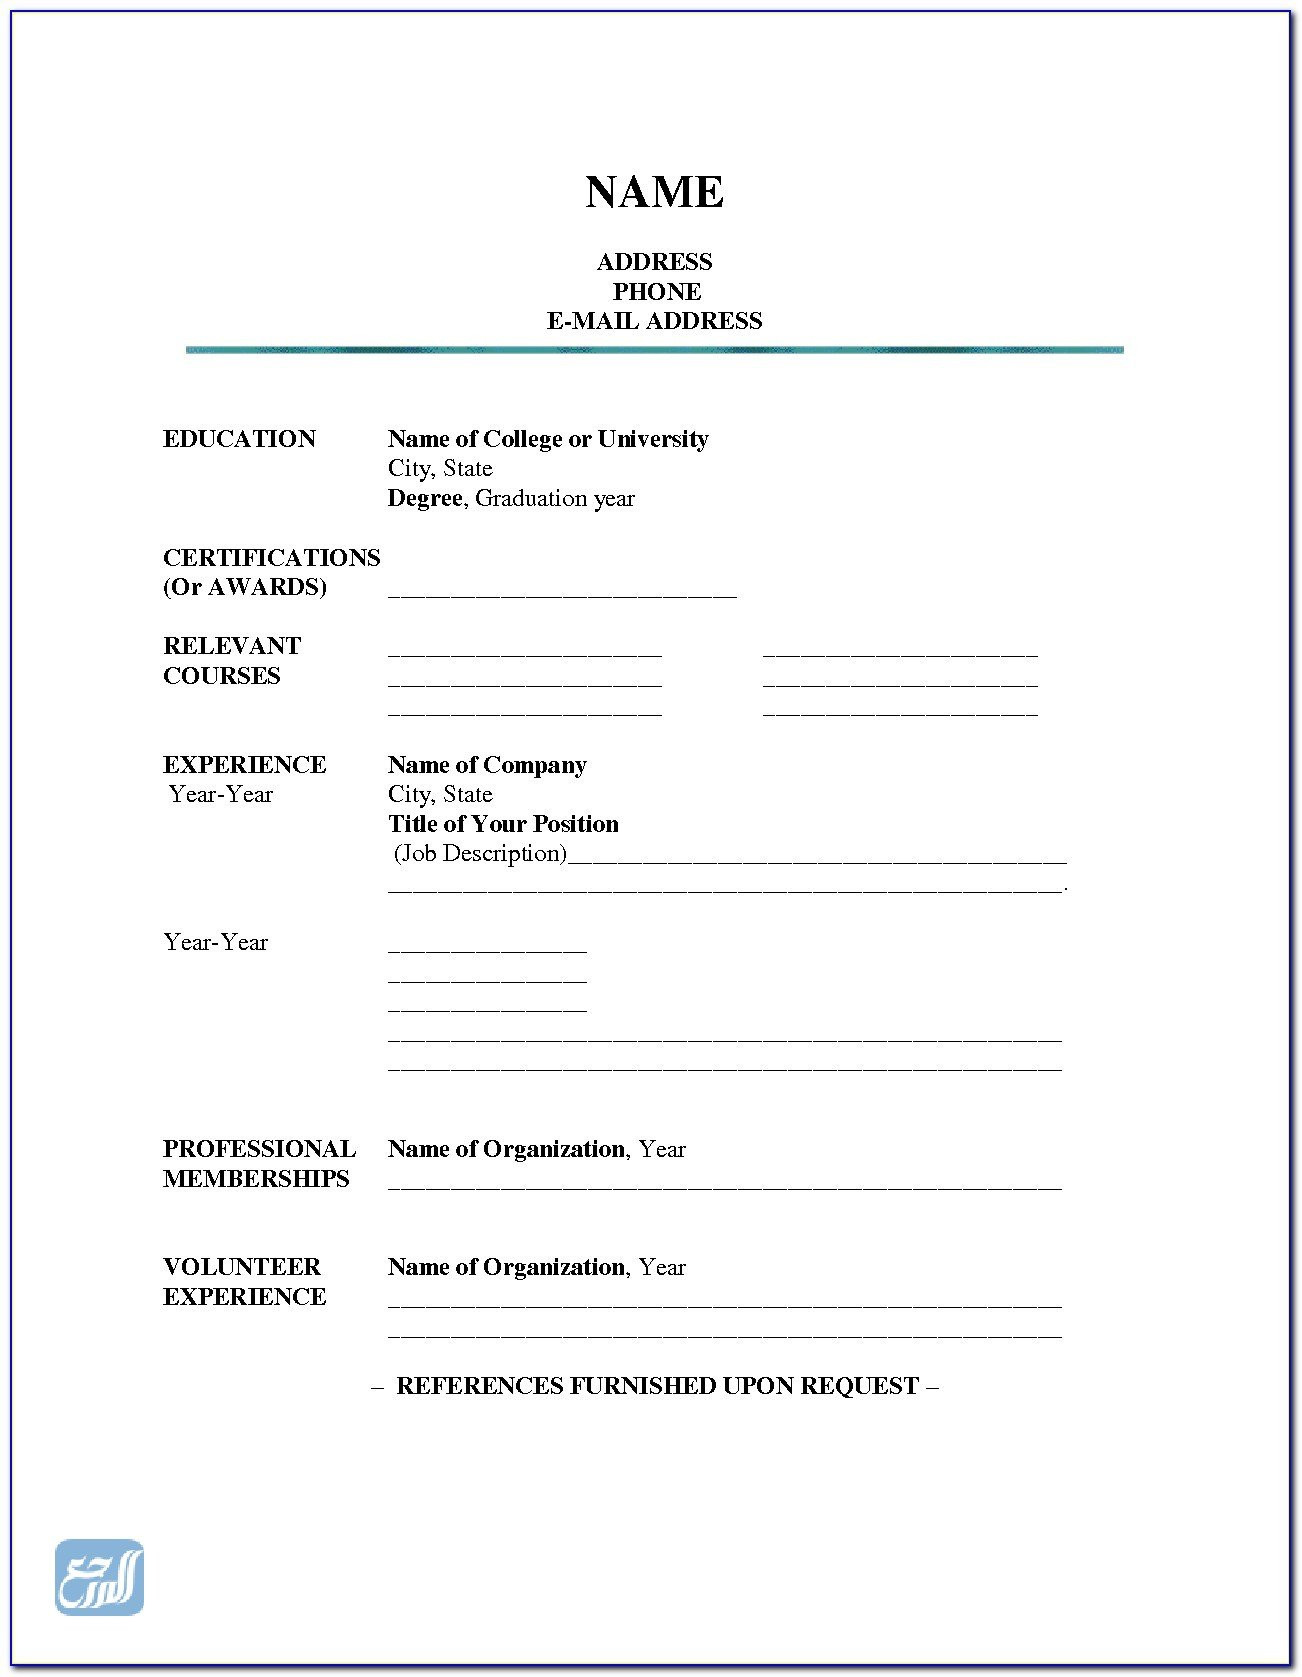 Blank Resume Templates for Free to Fill In ÙÙÙØ°Ø¬ Ø³ÙØ±Ø© Ø°Ø§ØªÙØ© Ø¬Ø§ÙØ² ÙÙØªØ¹Ø¨Ø¦Ø© Pdf â Ø´Ø¨ÙØ© ÙØ±Ø³ØªÙÙØ§